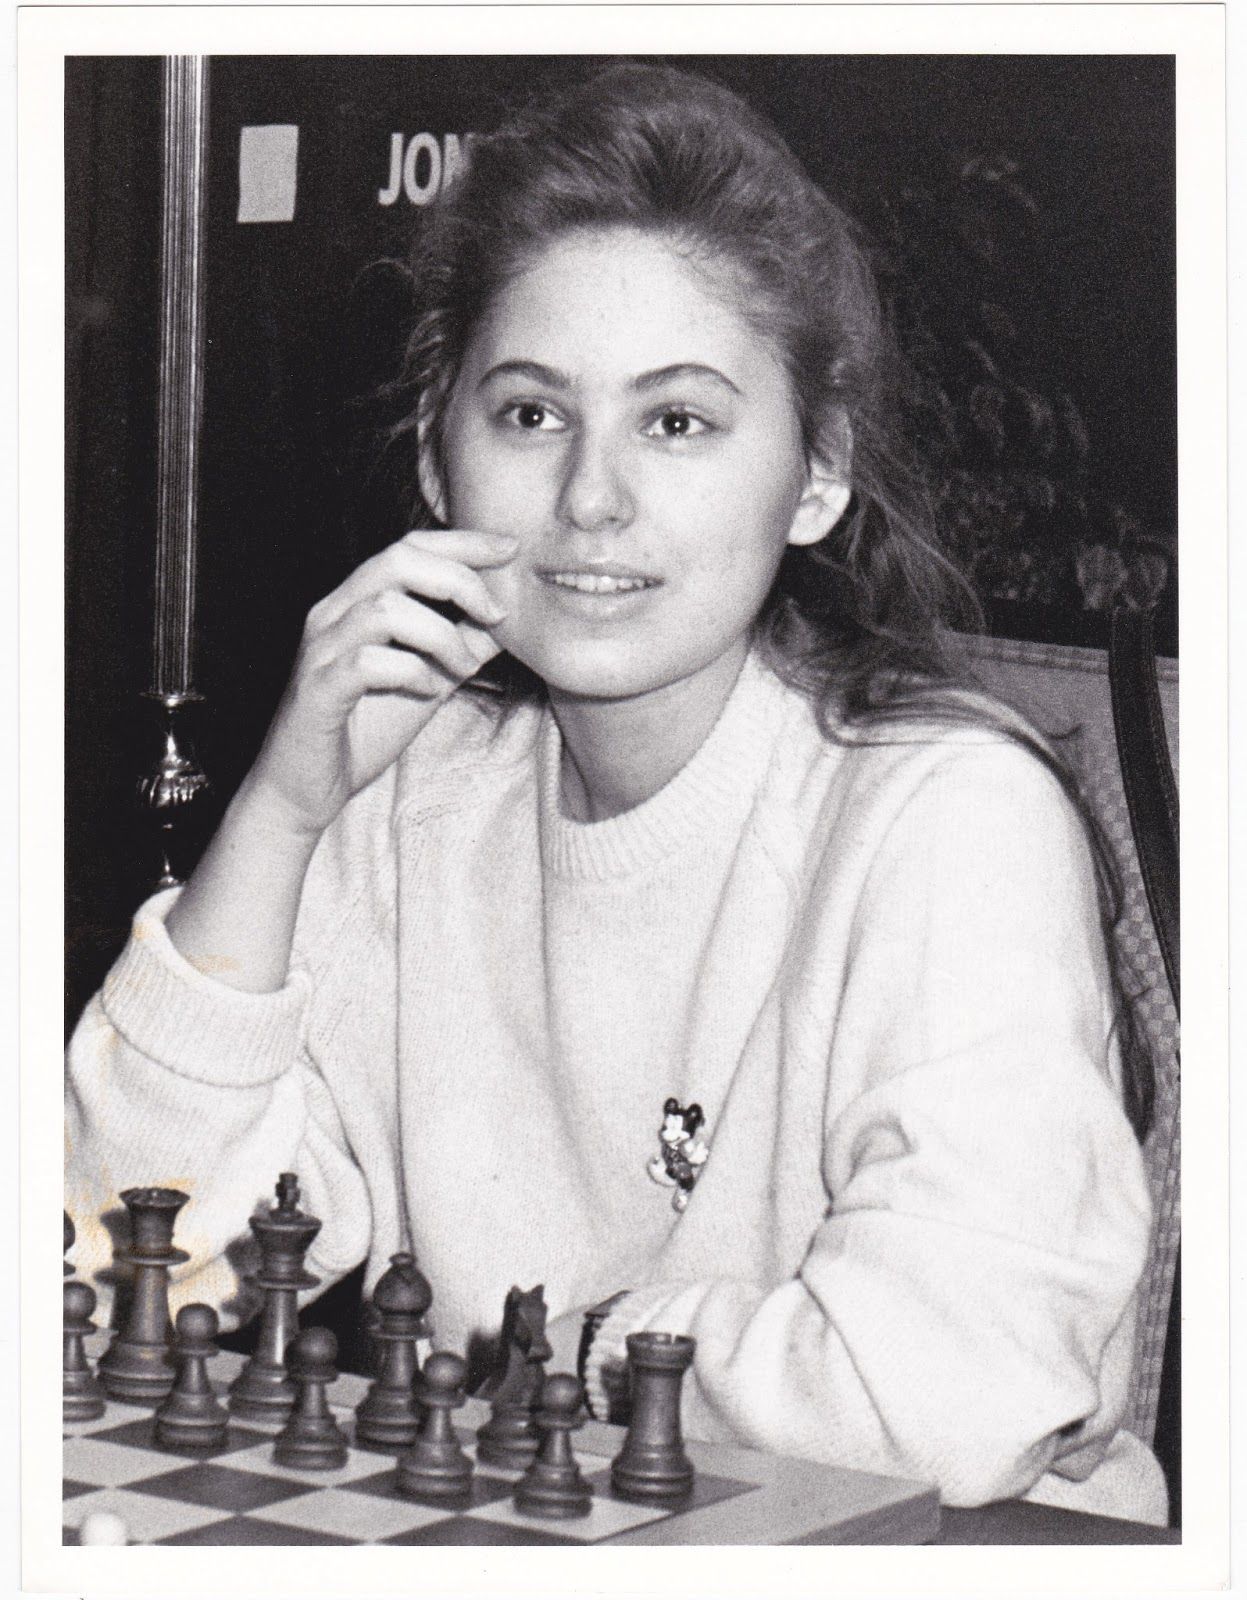 Judit Polgár > She is a Hungarian chess grandmaster. She is generally  considered the strongest female chess player of all time. She is th…